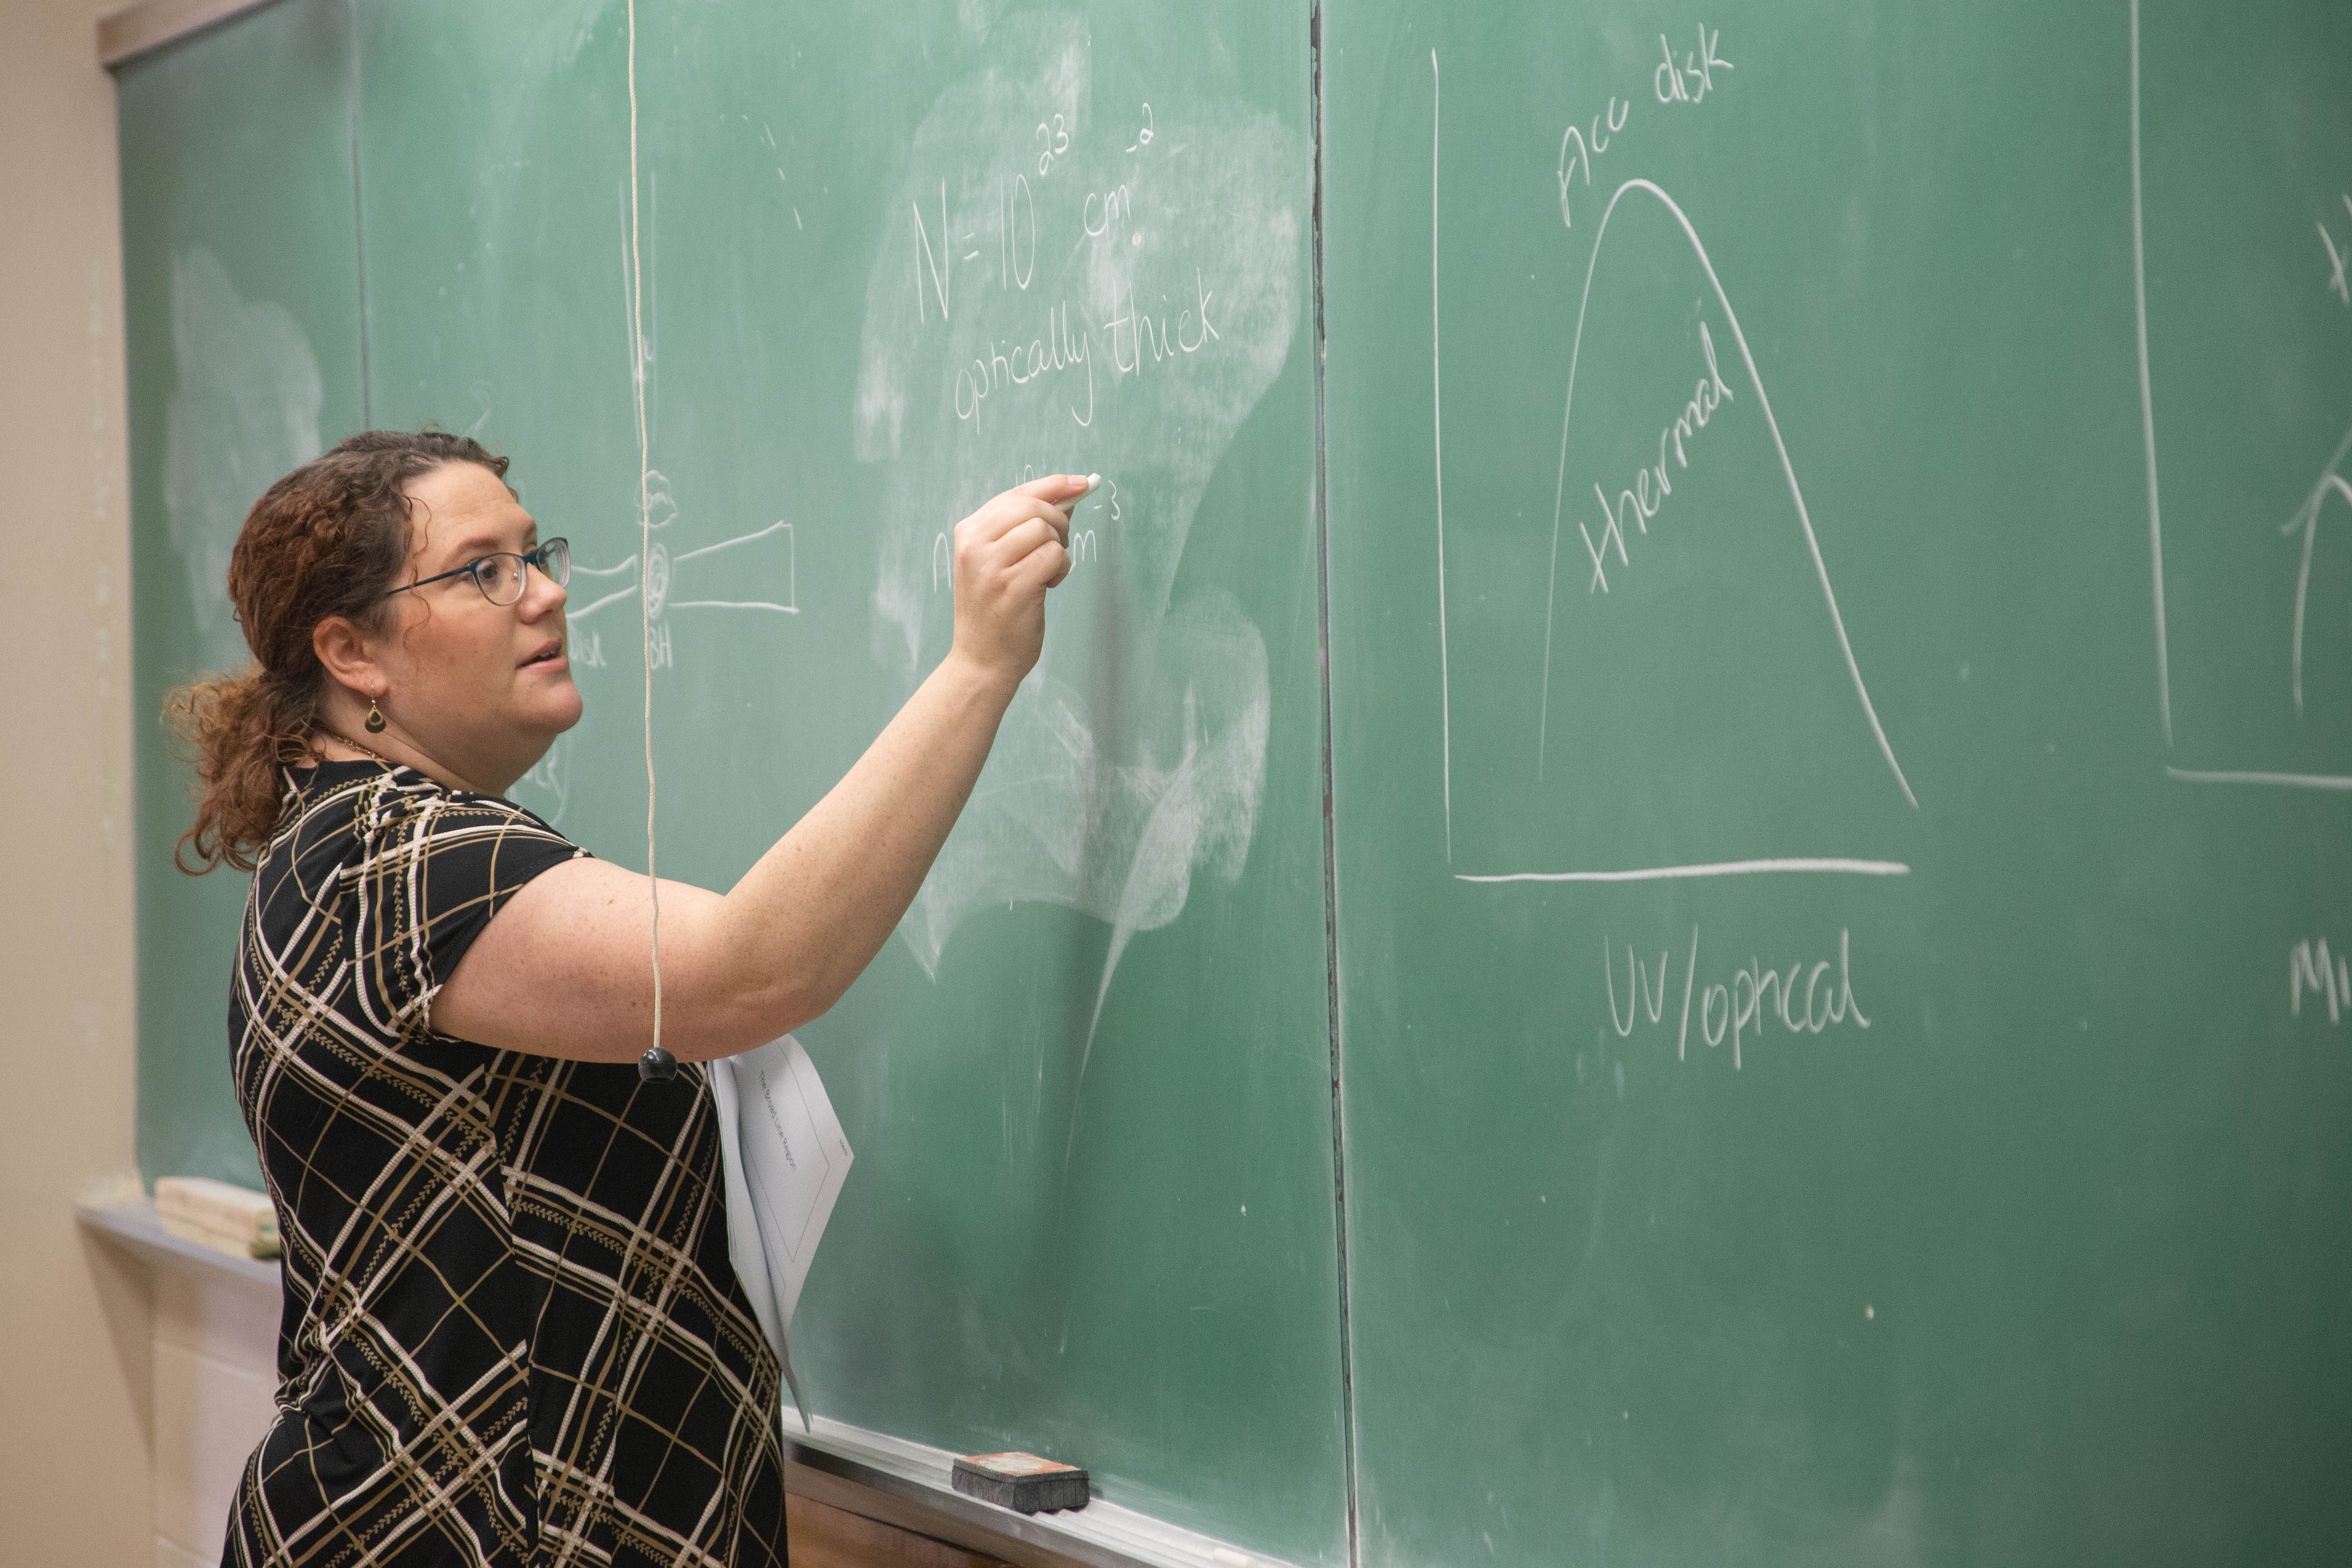 Allison Kirkpatrick writes physics equations and graphs on a chalkboard in front of a classroom